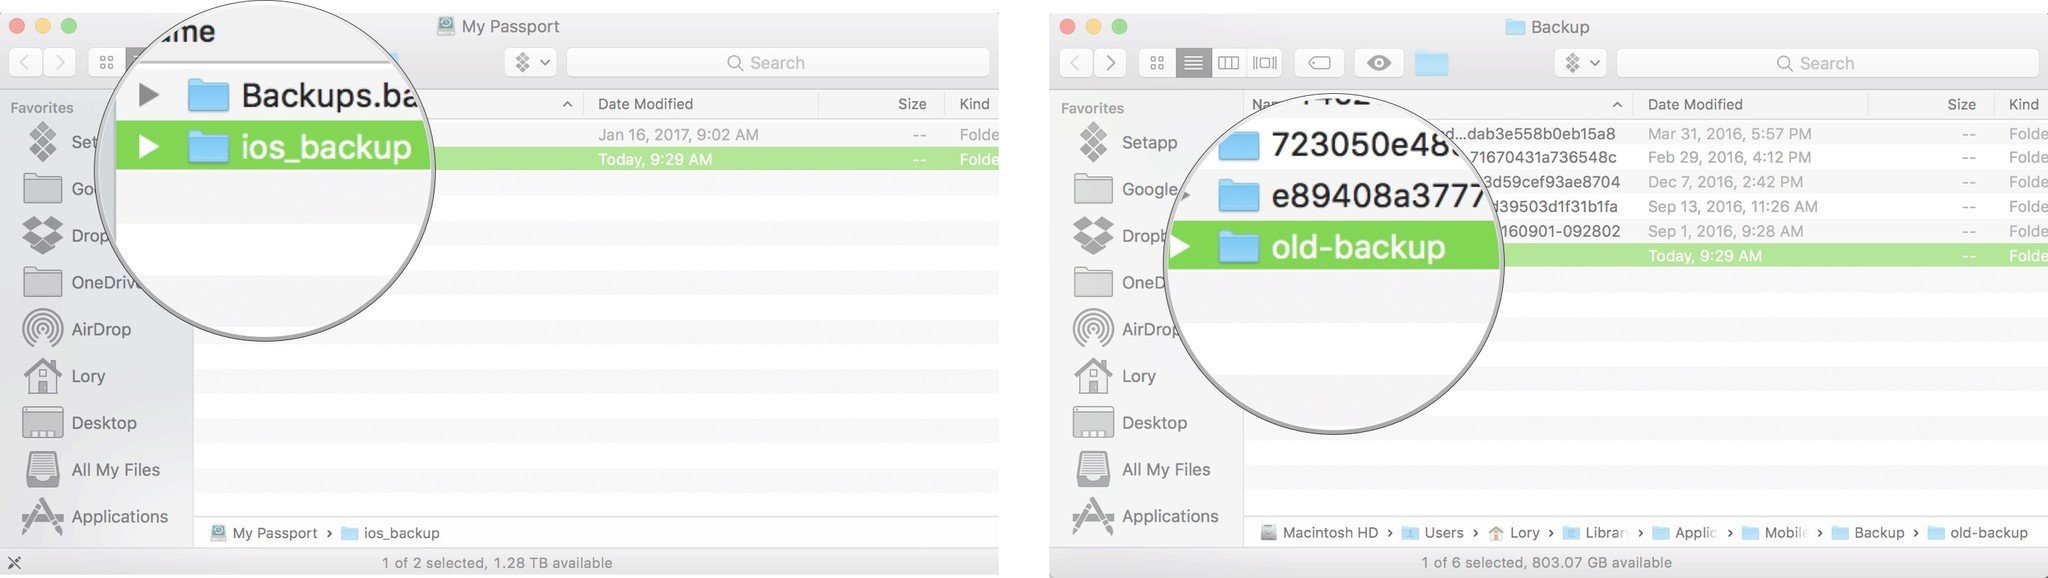 Where are iPhone backups stored on Mac?